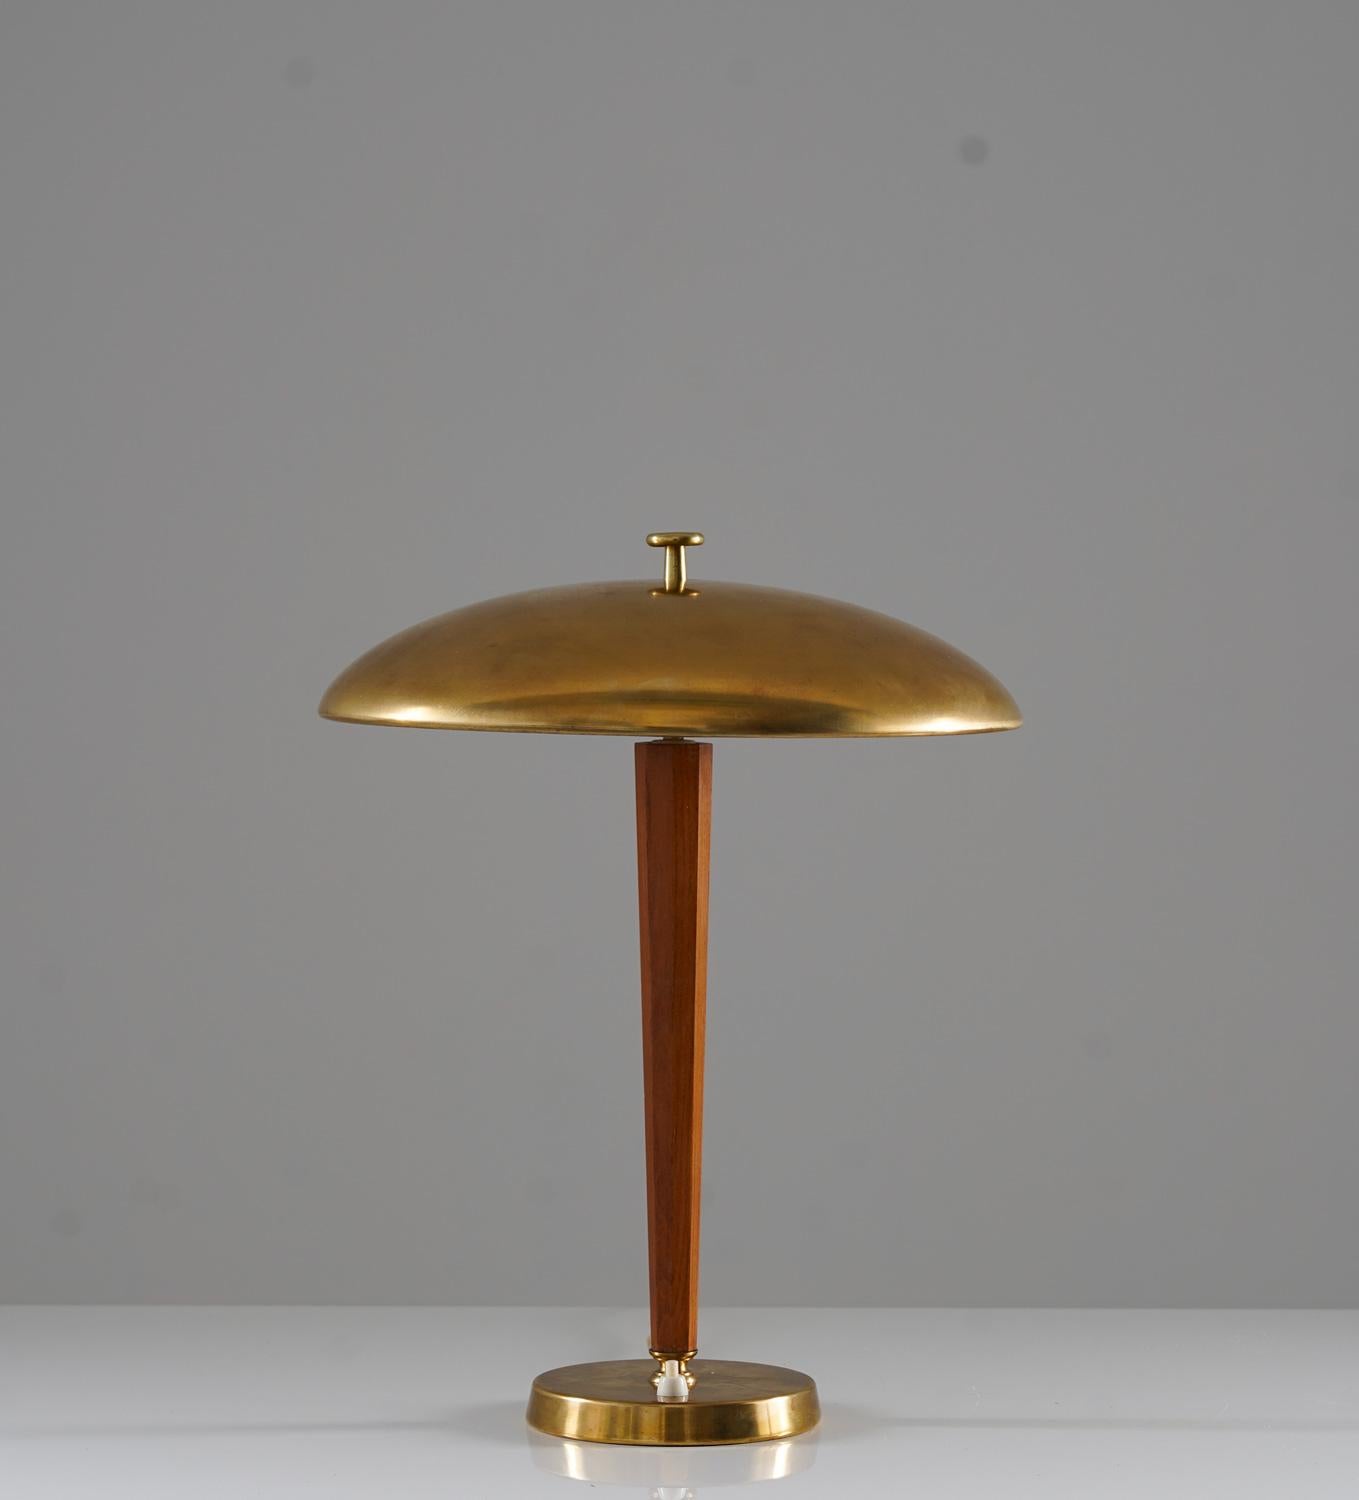 Beautiful table lamp manufactured by Nordiska Kompaniet (NK), circa 1930.
This lamp is made of brass and oak with a shade of thick, solid brass. The shade hides two light sources (E27, 25w). 


Condition: Good original condition with light signs